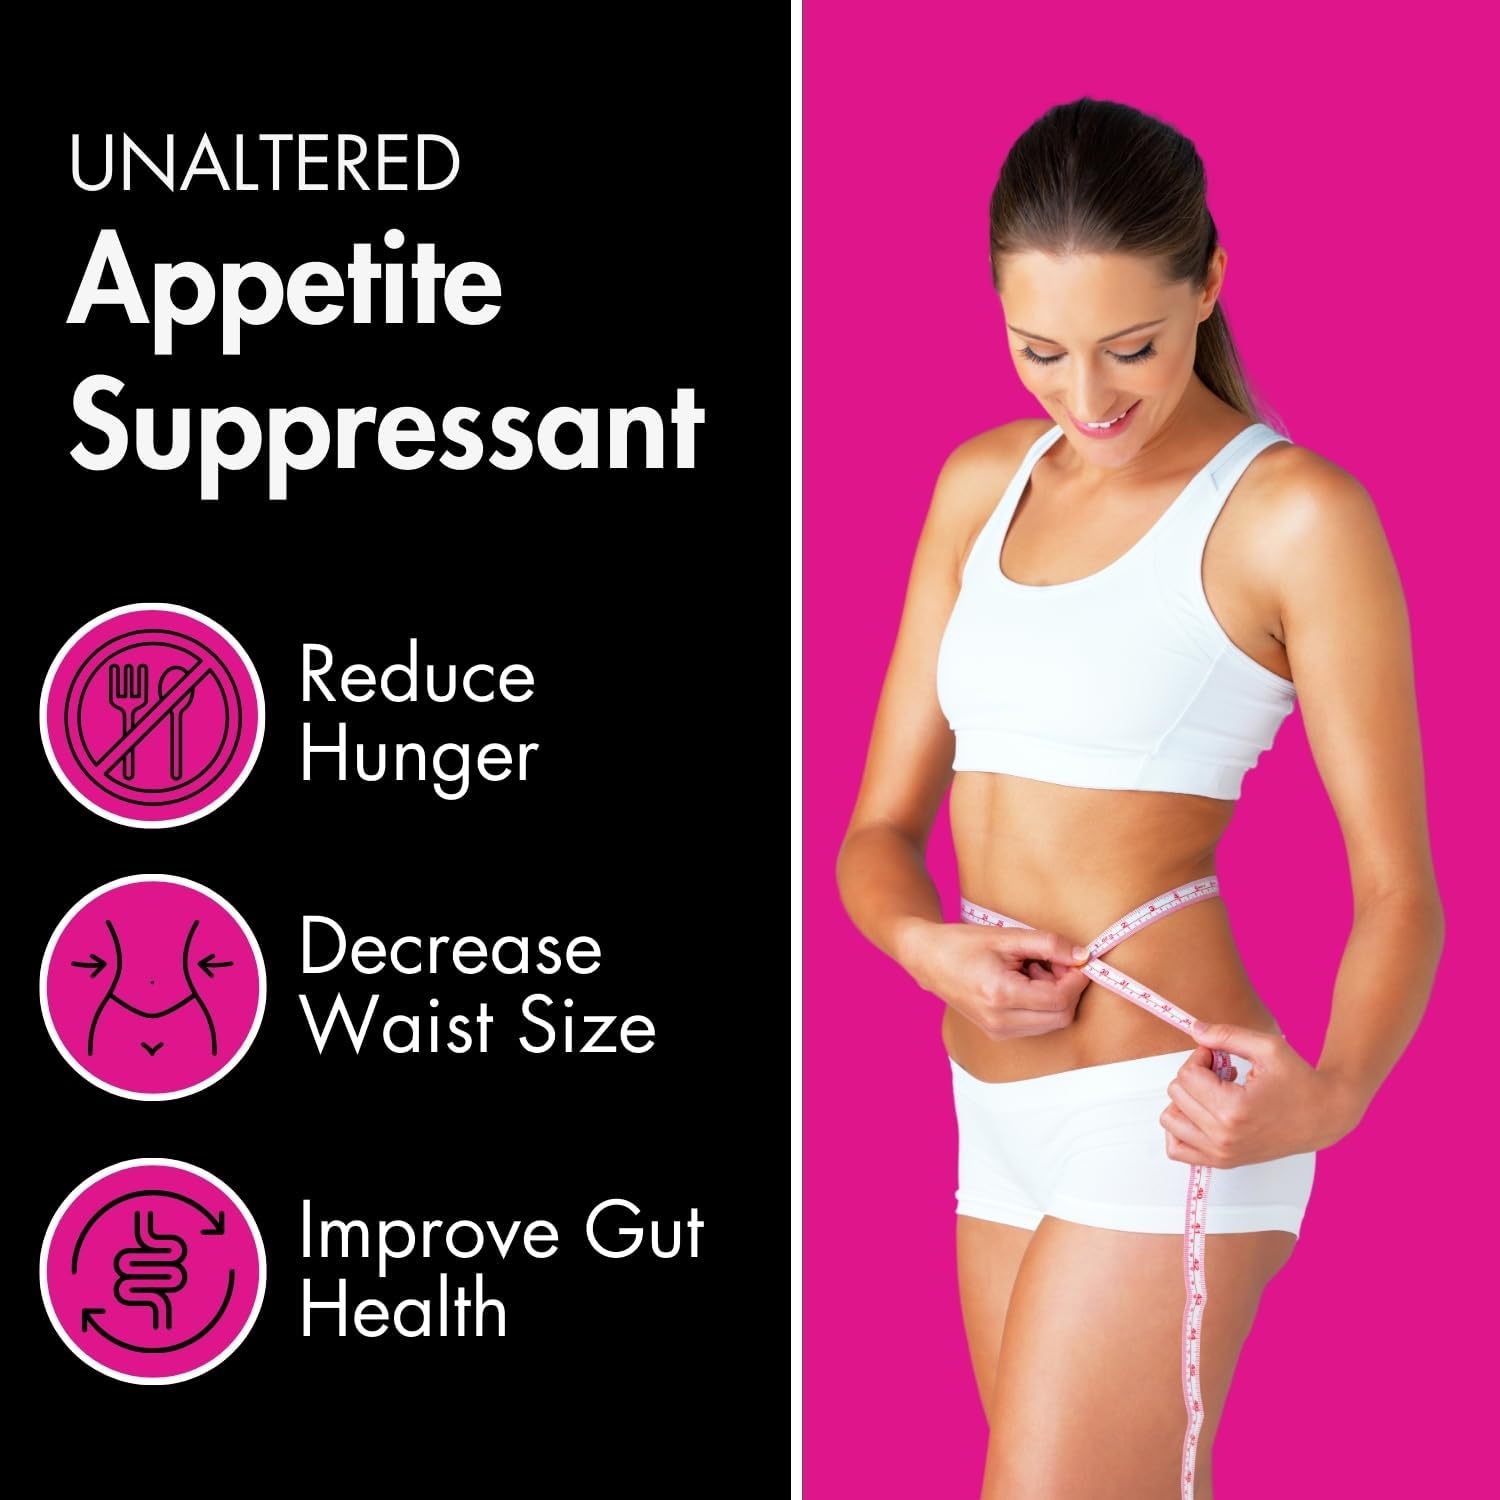 UNALTERED Appetite Suppressant for Women - Combat Cravings, Bloating,  Support Weight Loss - Natural Diet Pills, Fat Burner,  Carb Blocker - Features Chromium Picolinate  Glucomannan - 120 Ct